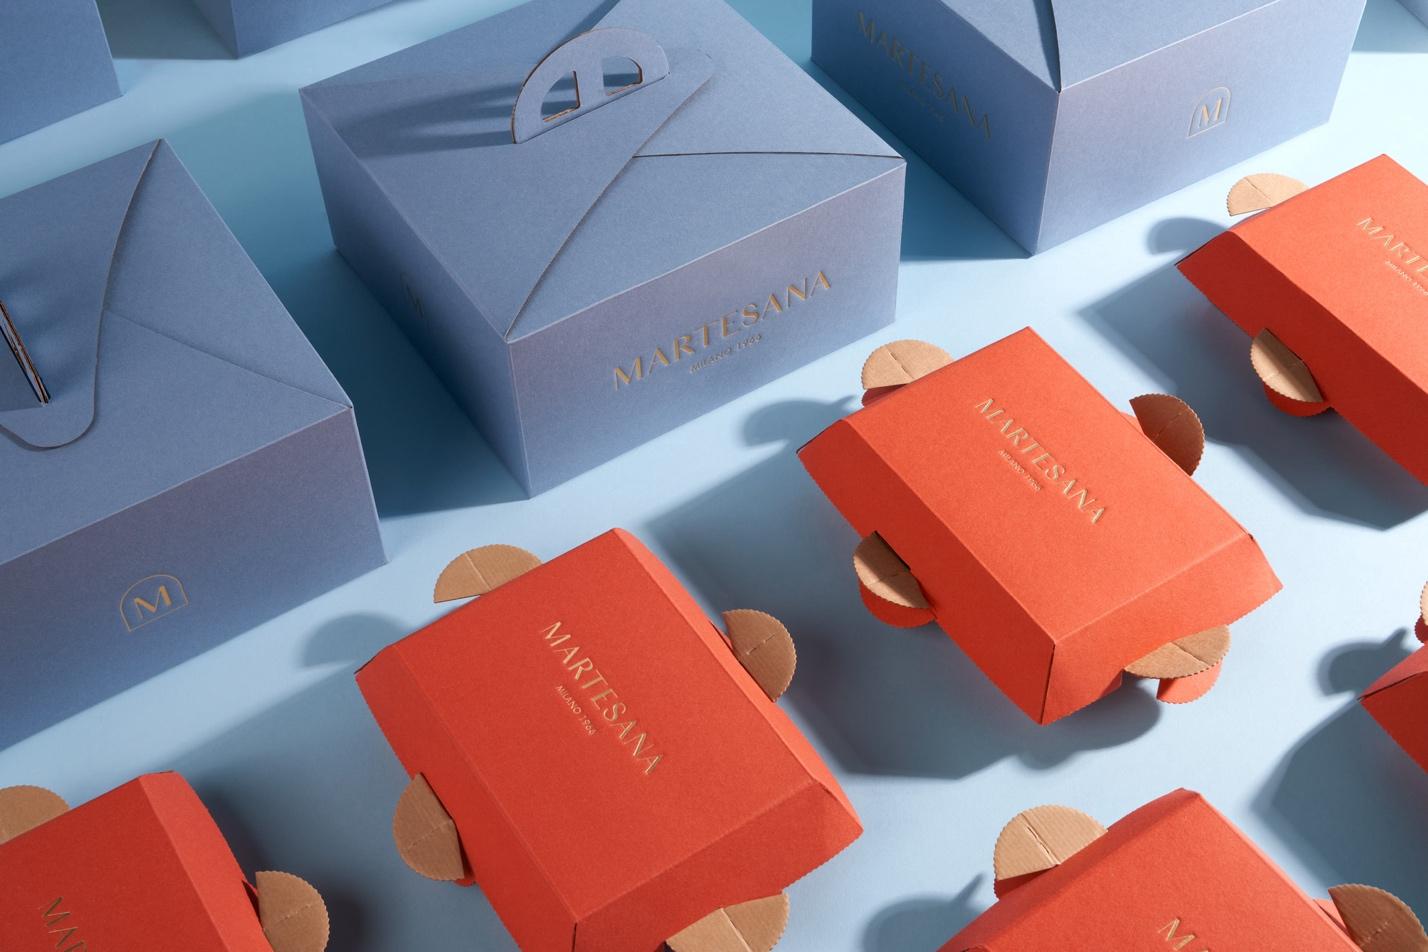 Branding and packaging design artifacts for Martesana pastry shop rebranding project